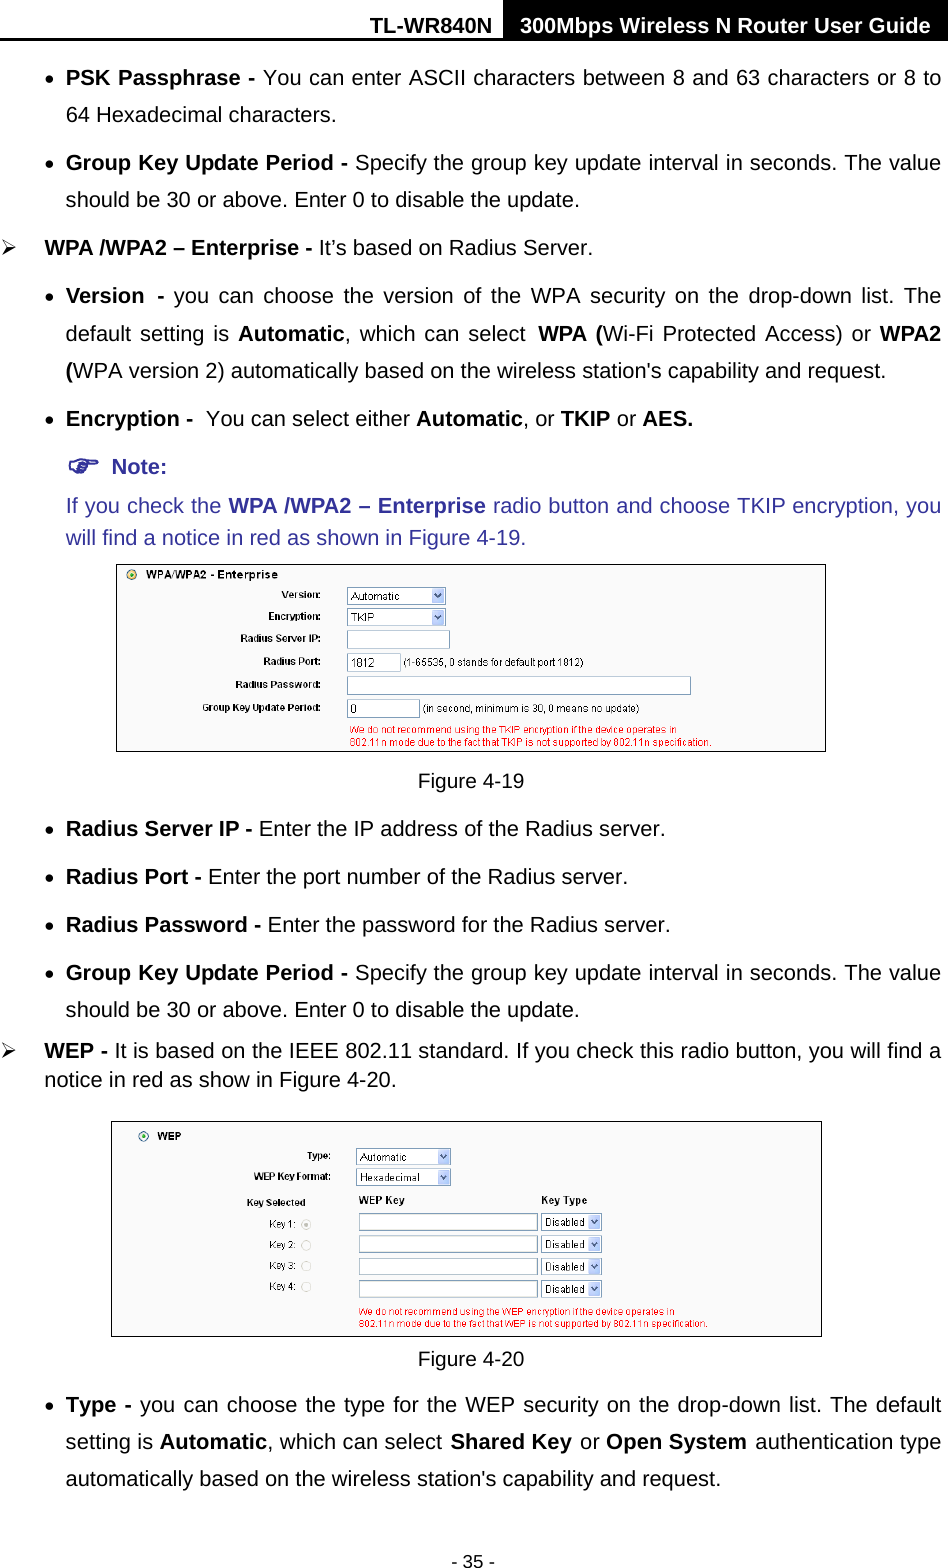 TL-WR840N 300Mbps Wireless N Router User Guide  - 35 - • PSK Passphrase - You can enter ASCII characters between 8 and 63 characters or 8 to 64 Hexadecimal characters. • Group Key Update Period - Specify the group key update interval in seconds. The value should be 30 or above. Enter 0 to disable the update.  WPA /WPA2 – Enterprise - It’s based on Radius Server. • Version - you can choose the version of the WPA security on the drop-down list. The default setting is Automatic, which can select WPA (Wi-Fi Protected Access) or WPA2 (WPA version 2) automatically based on the wireless station&apos;s capability and request. • Encryption - You can select either Automatic, or TKIP or AES.  Note: If you check the WPA /WPA2 – Enterprise radio button and choose TKIP encryption, you will find a notice in red as shown in Figure 4-19.  Figure 4-19 • Radius Server IP - Enter the IP address of the Radius server. • Radius Port - Enter the port number of the Radius server. • Radius Password - Enter the password for the Radius server. • Group Key Update Period - Specify the group key update interval in seconds. The value should be 30 or above. Enter 0 to disable the update.  WEP - It is based on the IEEE 802.11 standard. If you check this radio button, you will find a notice in red as show in Figure 4-20.    Figure 4-20 • Type - you can choose the type for the WEP security on the drop-down list. The default setting is Automatic, which can select Shared Key or Open System authentication type automatically based on the wireless station&apos;s capability and request. 